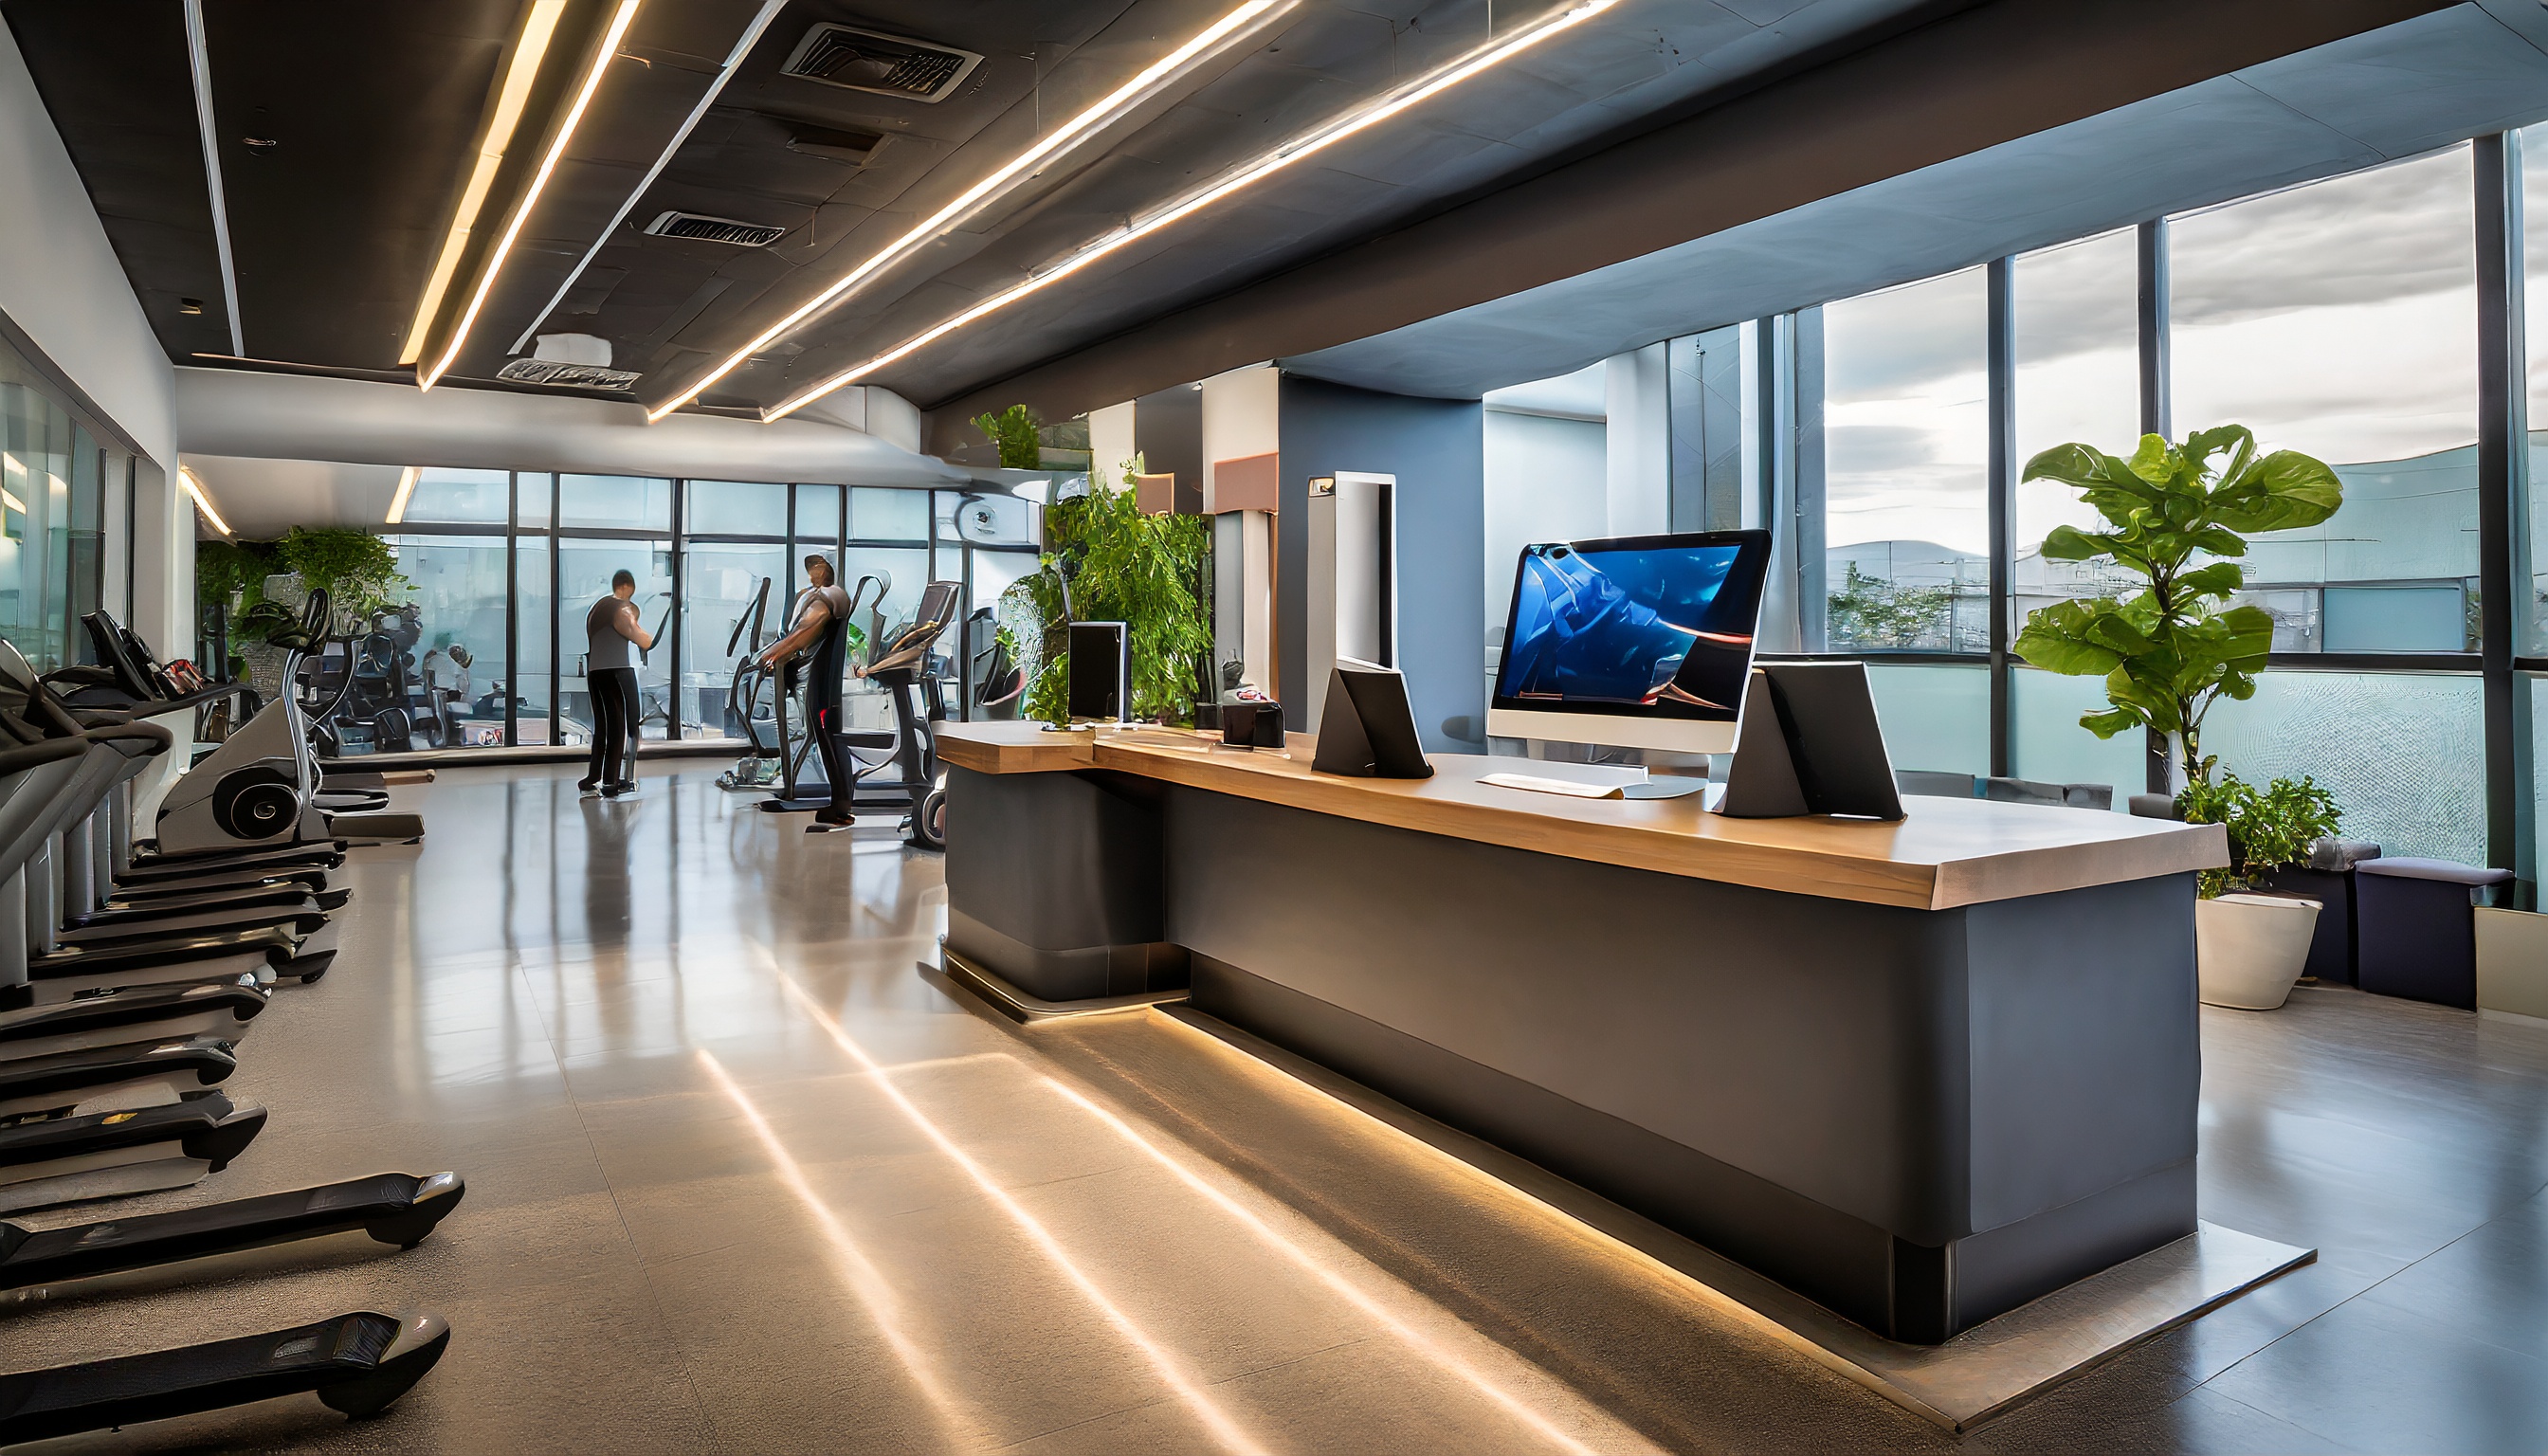 Firefly_A_smart_fitness_studio_reception_desk_with_an_imac_on_it__staff_and_members_79093.jpg